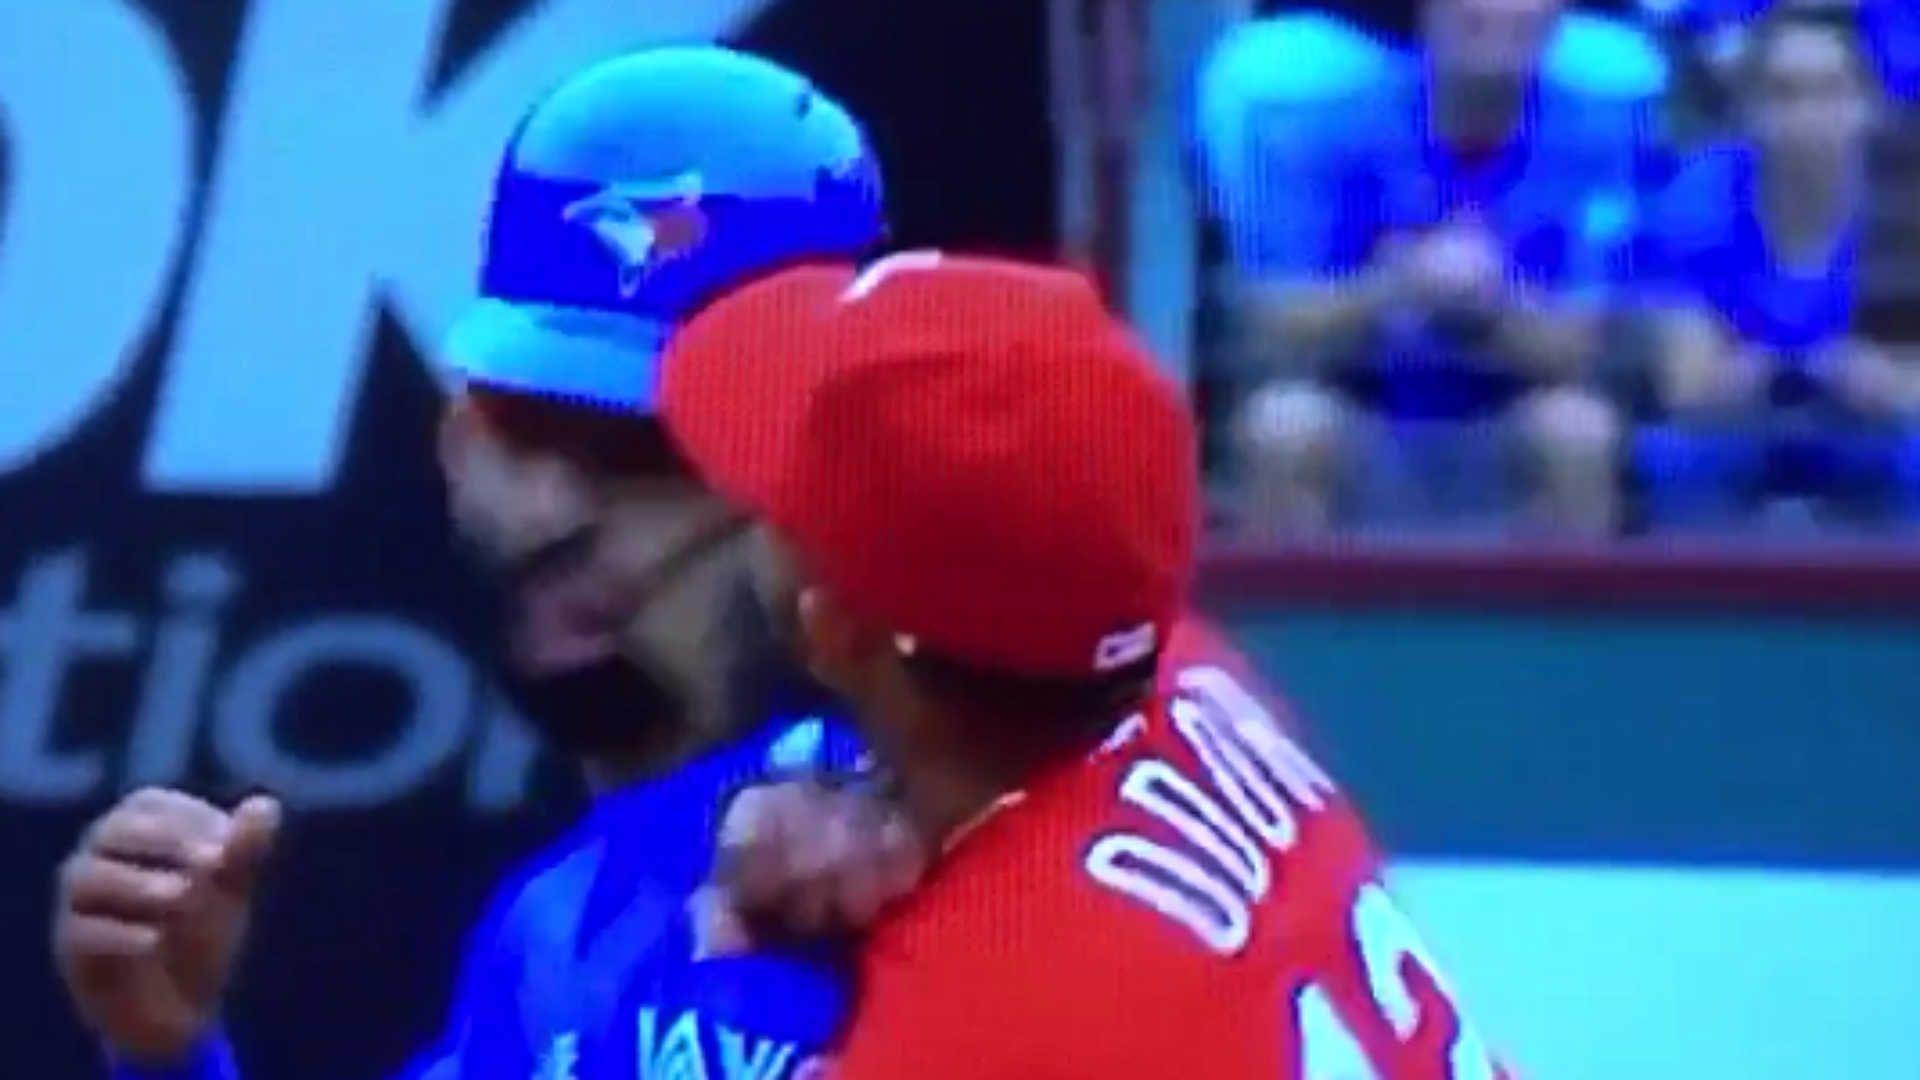 WATCH: Rougned Odor Punches Jose Bautista During Blue Jays Rangers